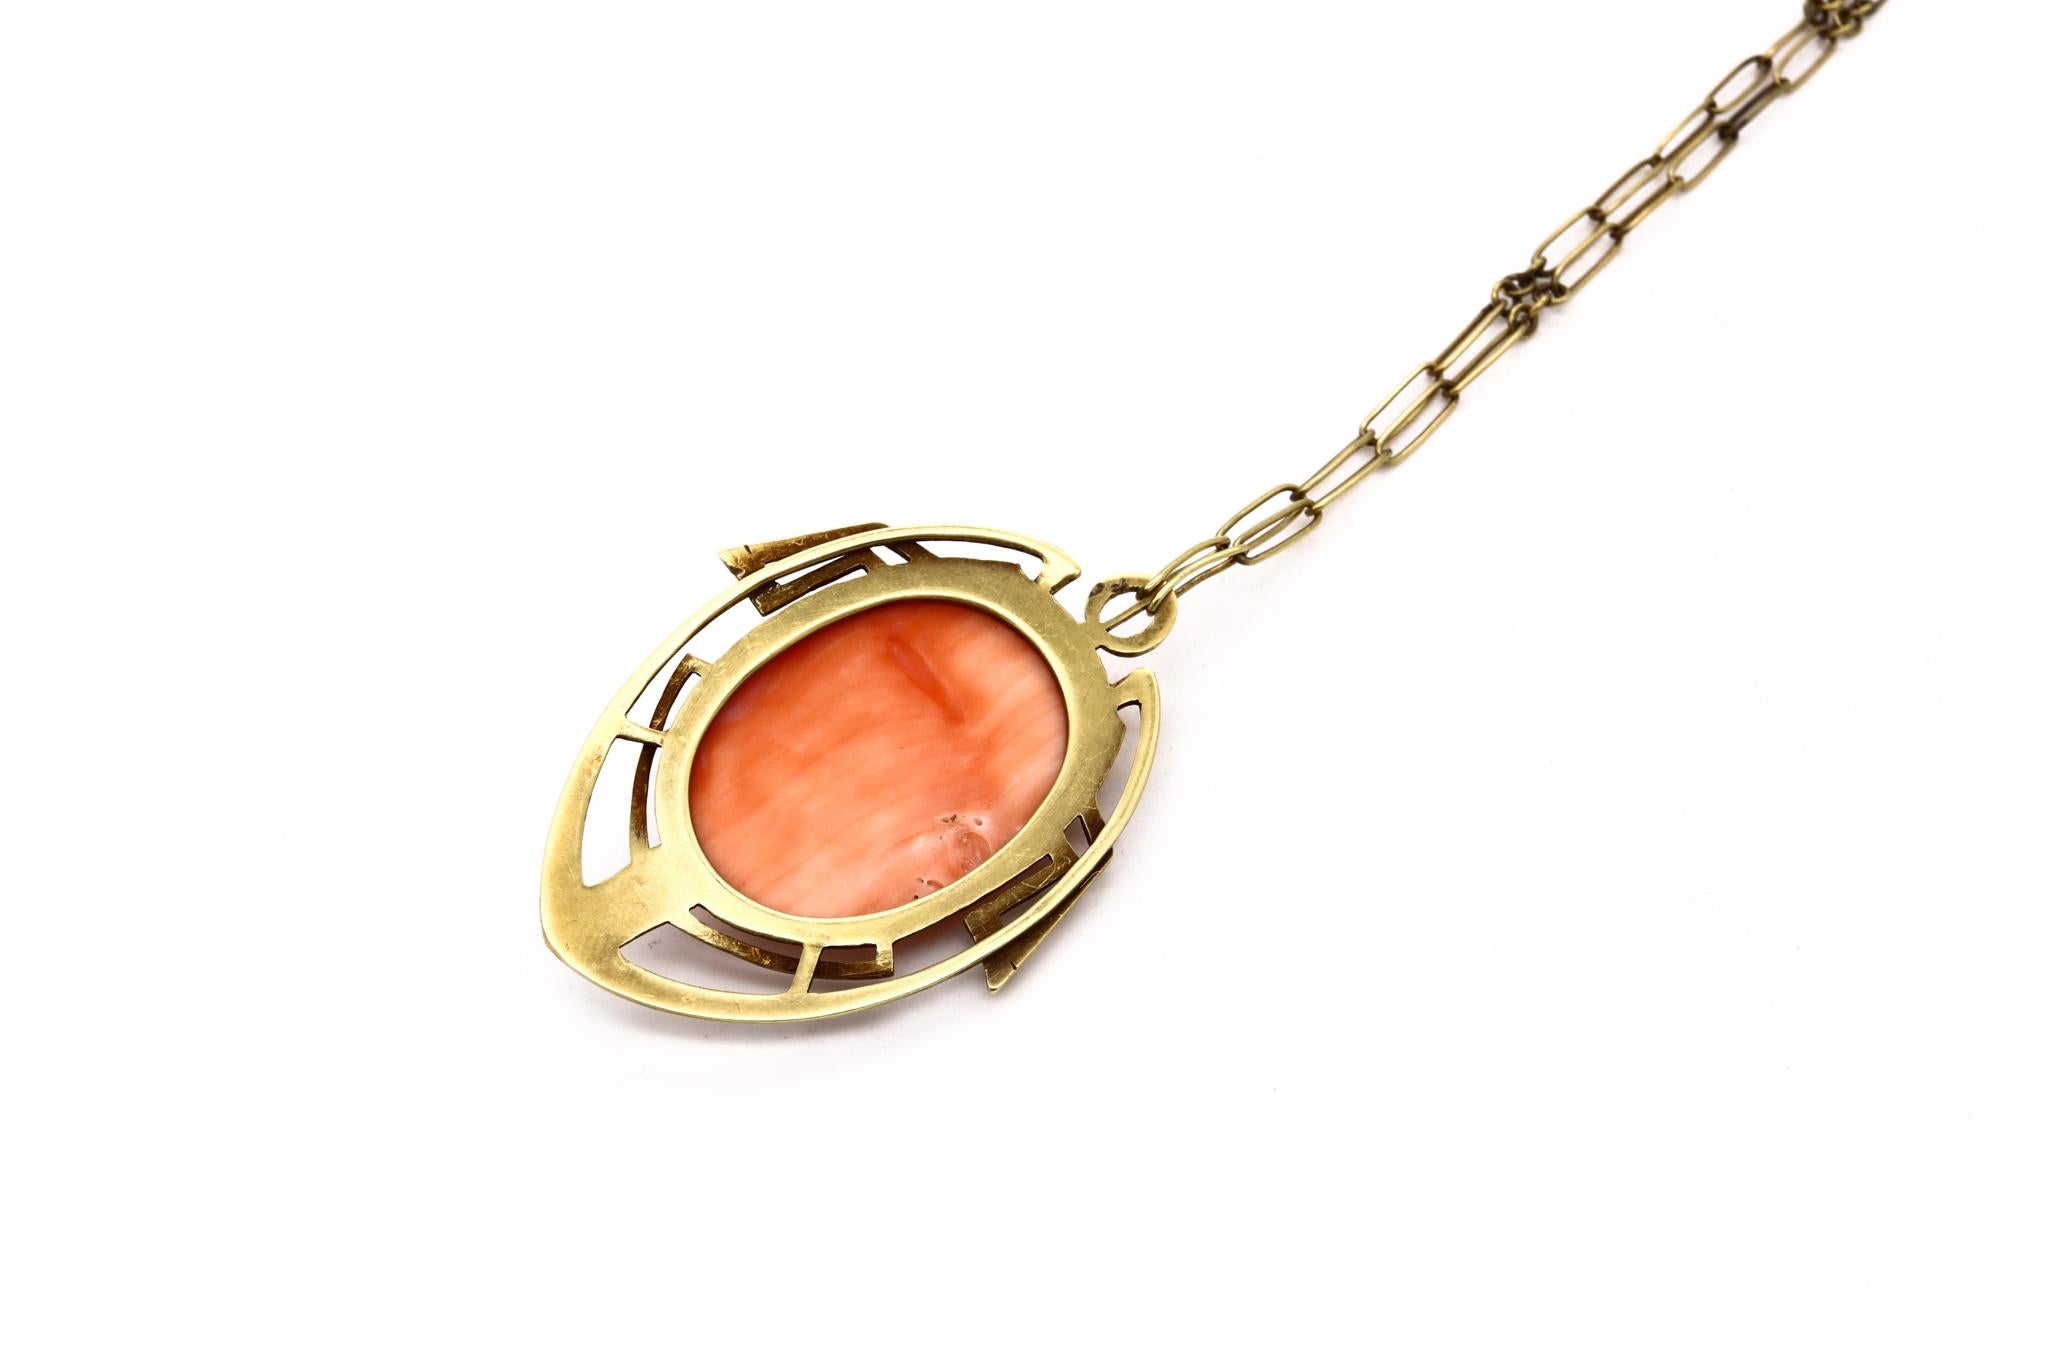 Women's British 1890 Rare Liberty Art and Craft Geometric Necklace 18kt Gold Coral Cameo For Sale